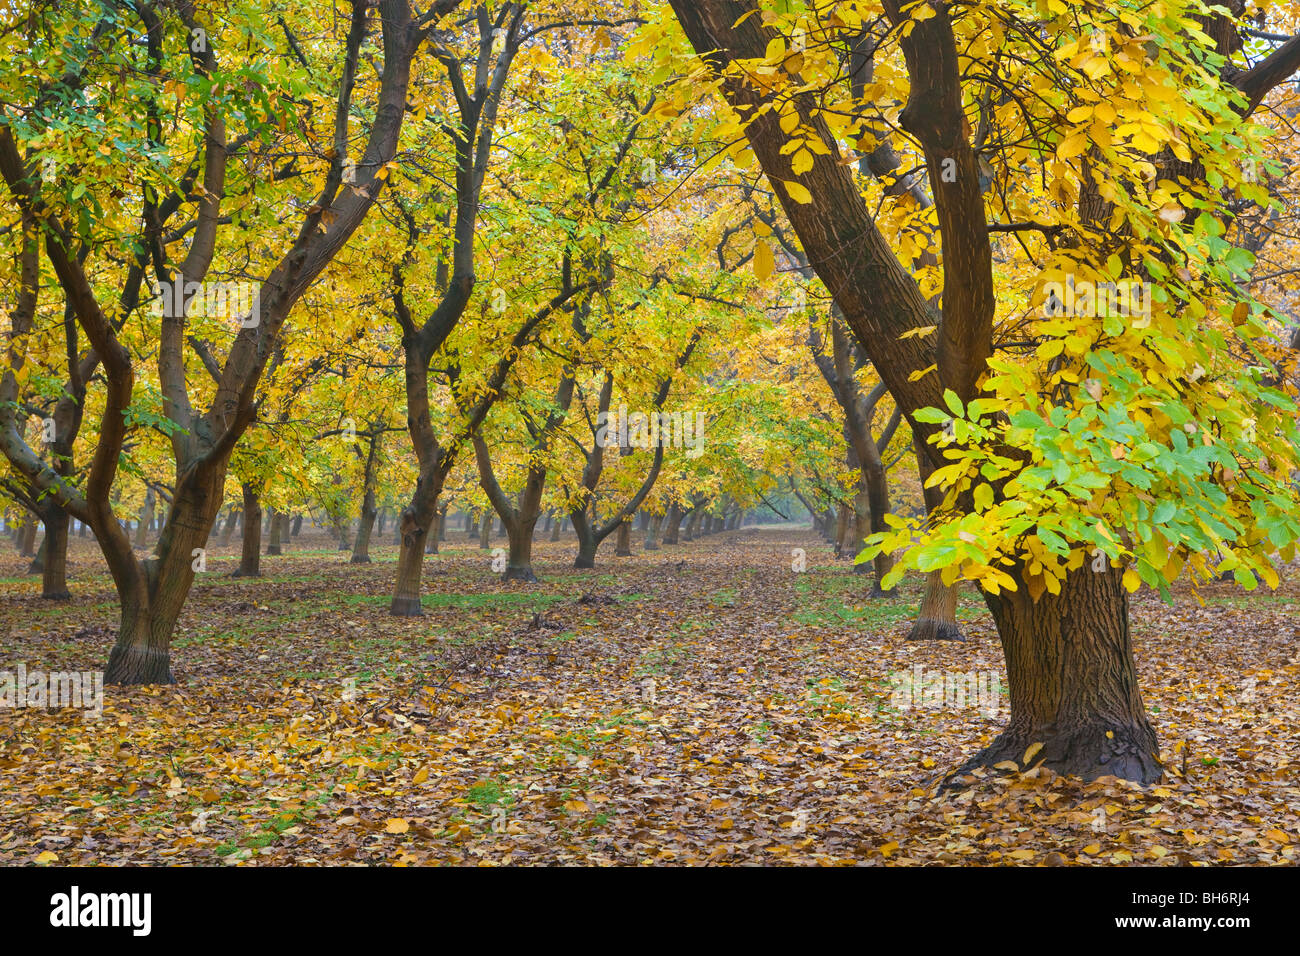 https://c8.alamy.com/comp/BH6RJ4/walnut-orchards-in-the-fall-in-the-sacramento-valley-california-BH6RJ4.jpg